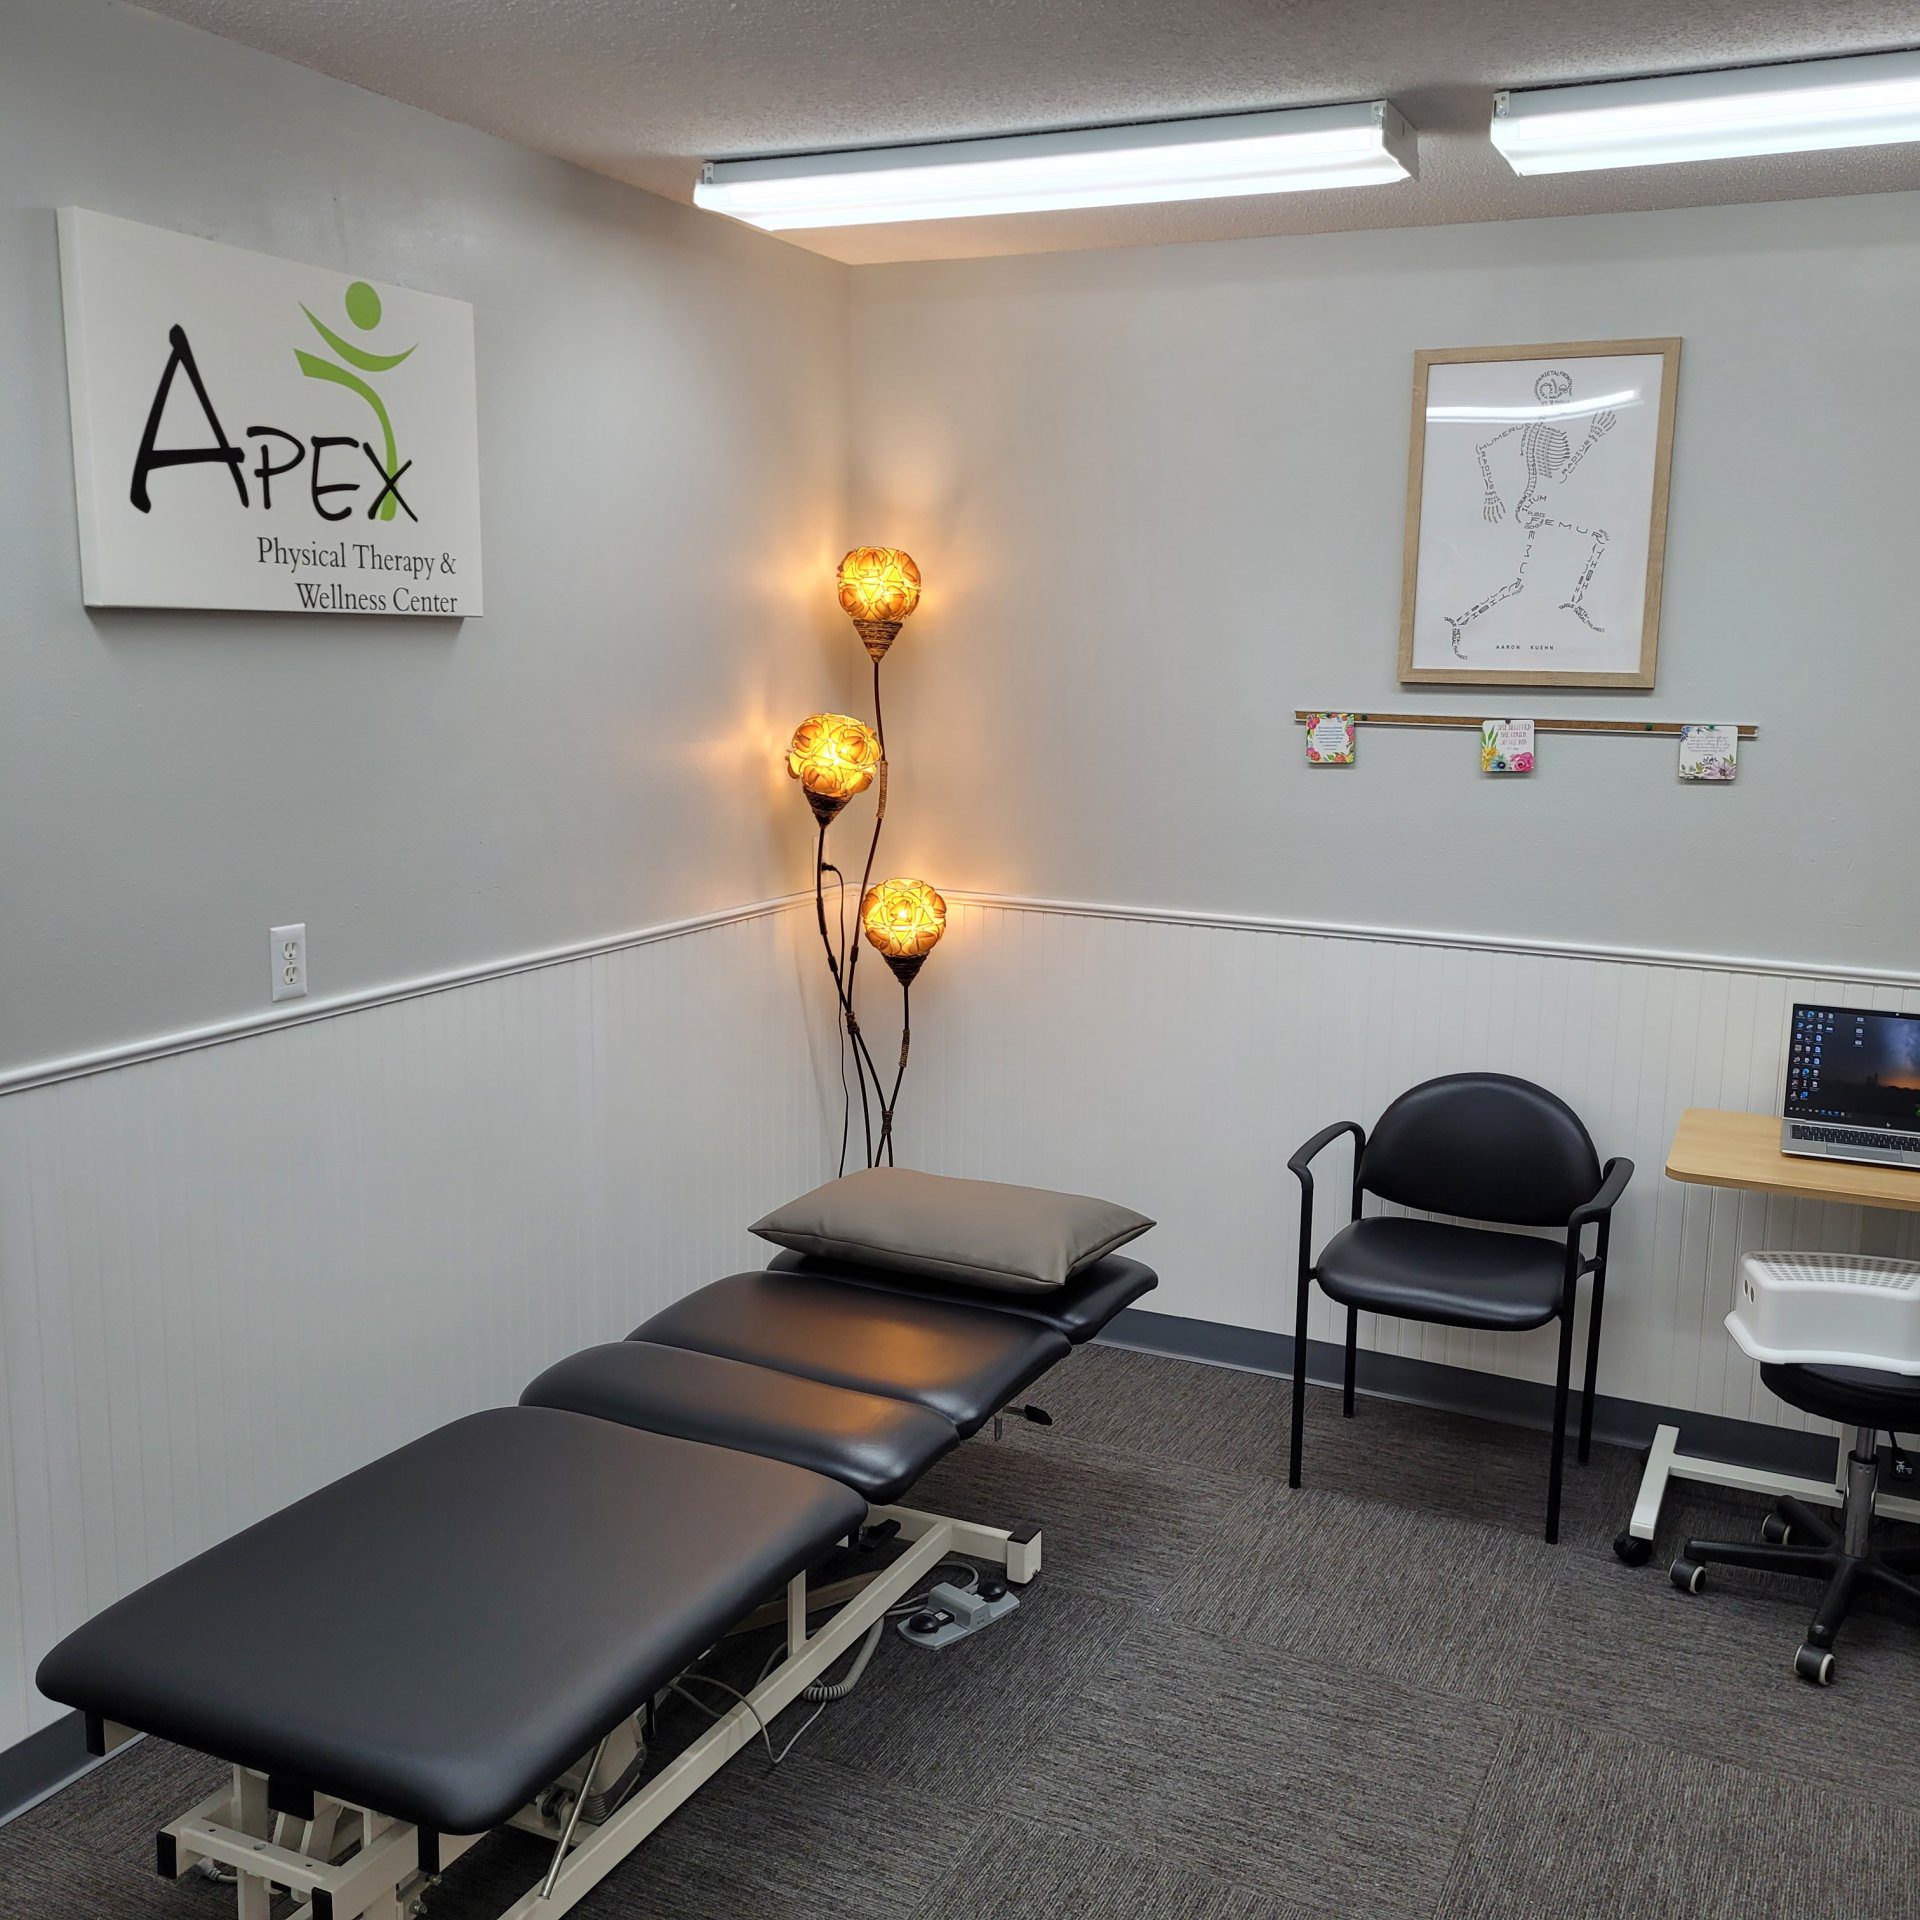 A clean and professional LaMoure physical therapy room with modern equipment and a warm lighting ambiance.